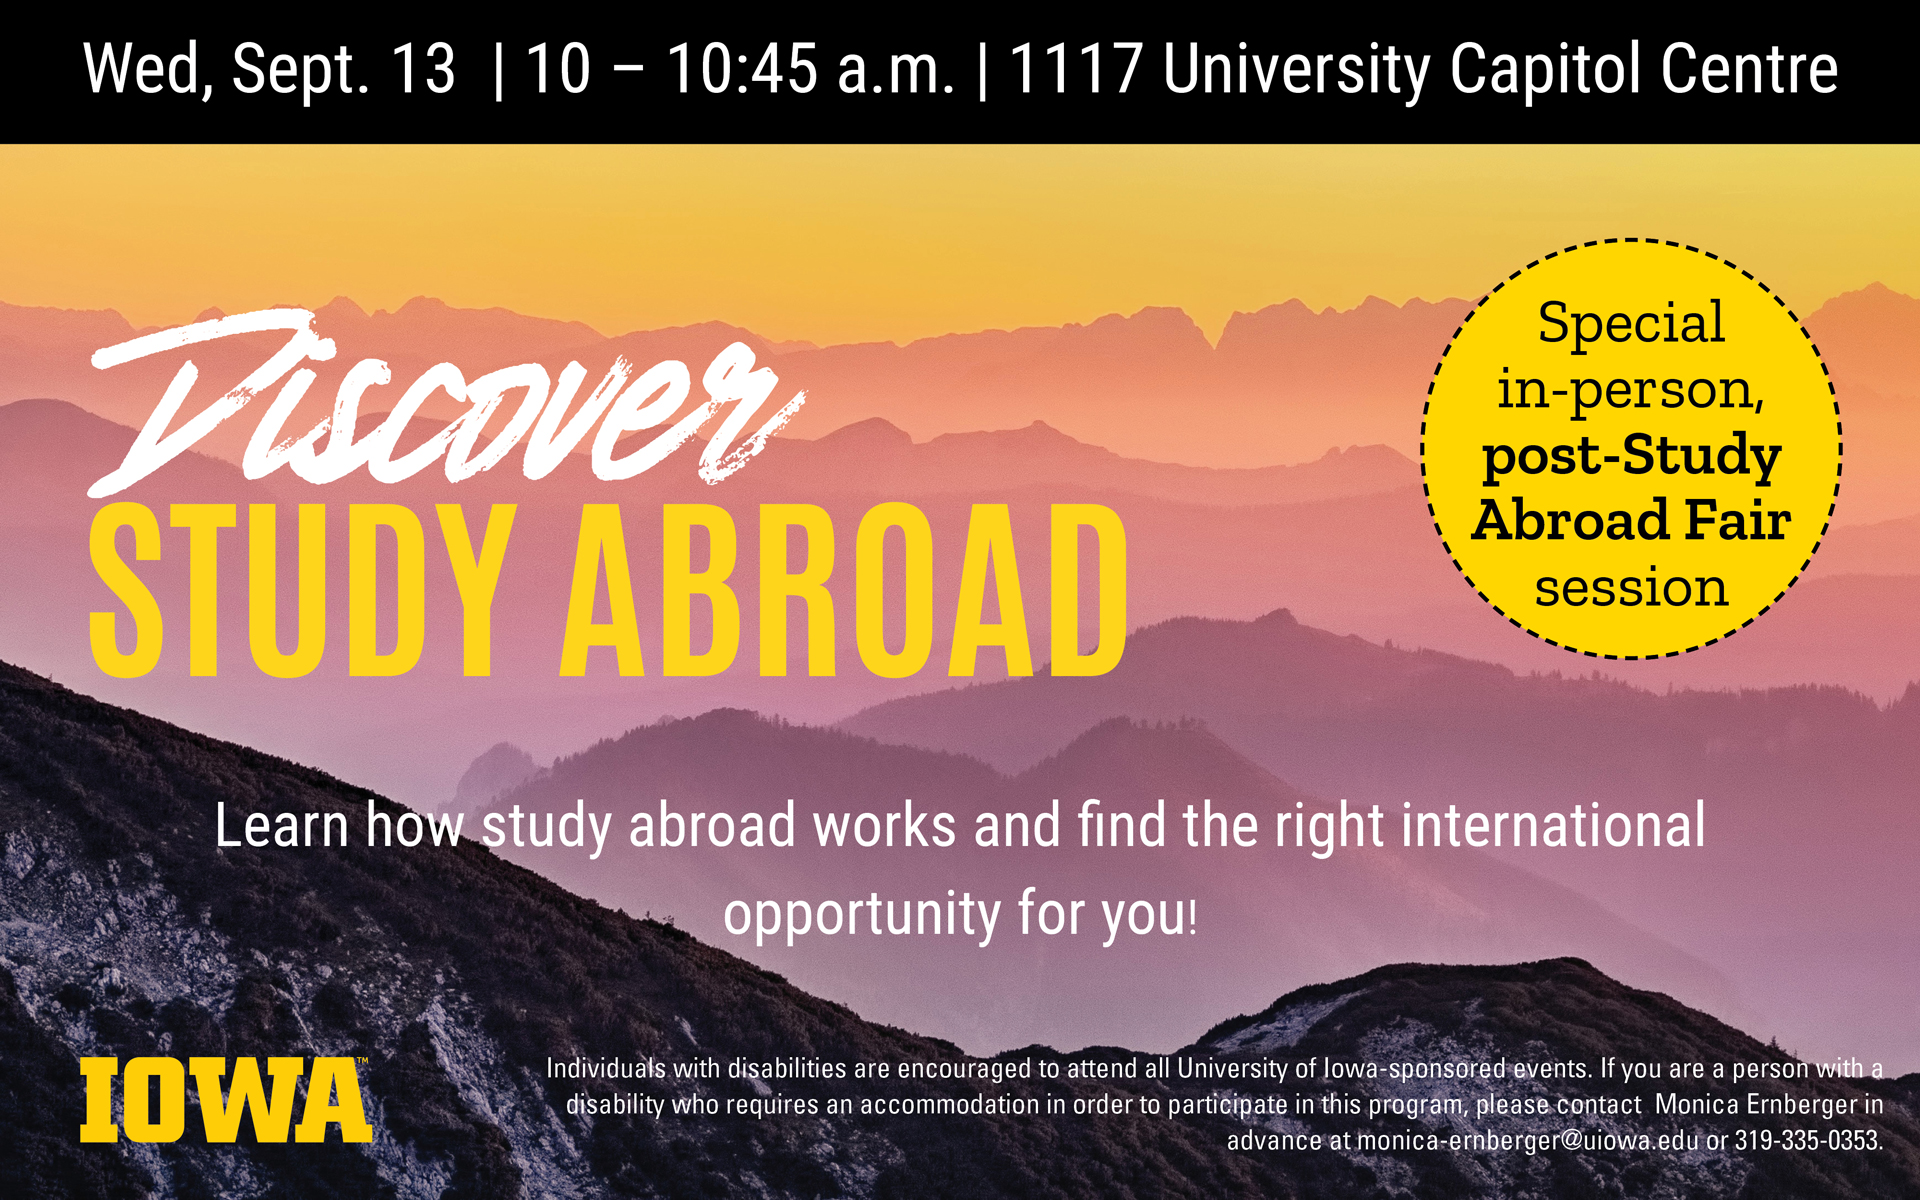 Discover Study Abroad: Wed. Sept. 13 10-10:45 a.m. at 1117 University Capitol Centre